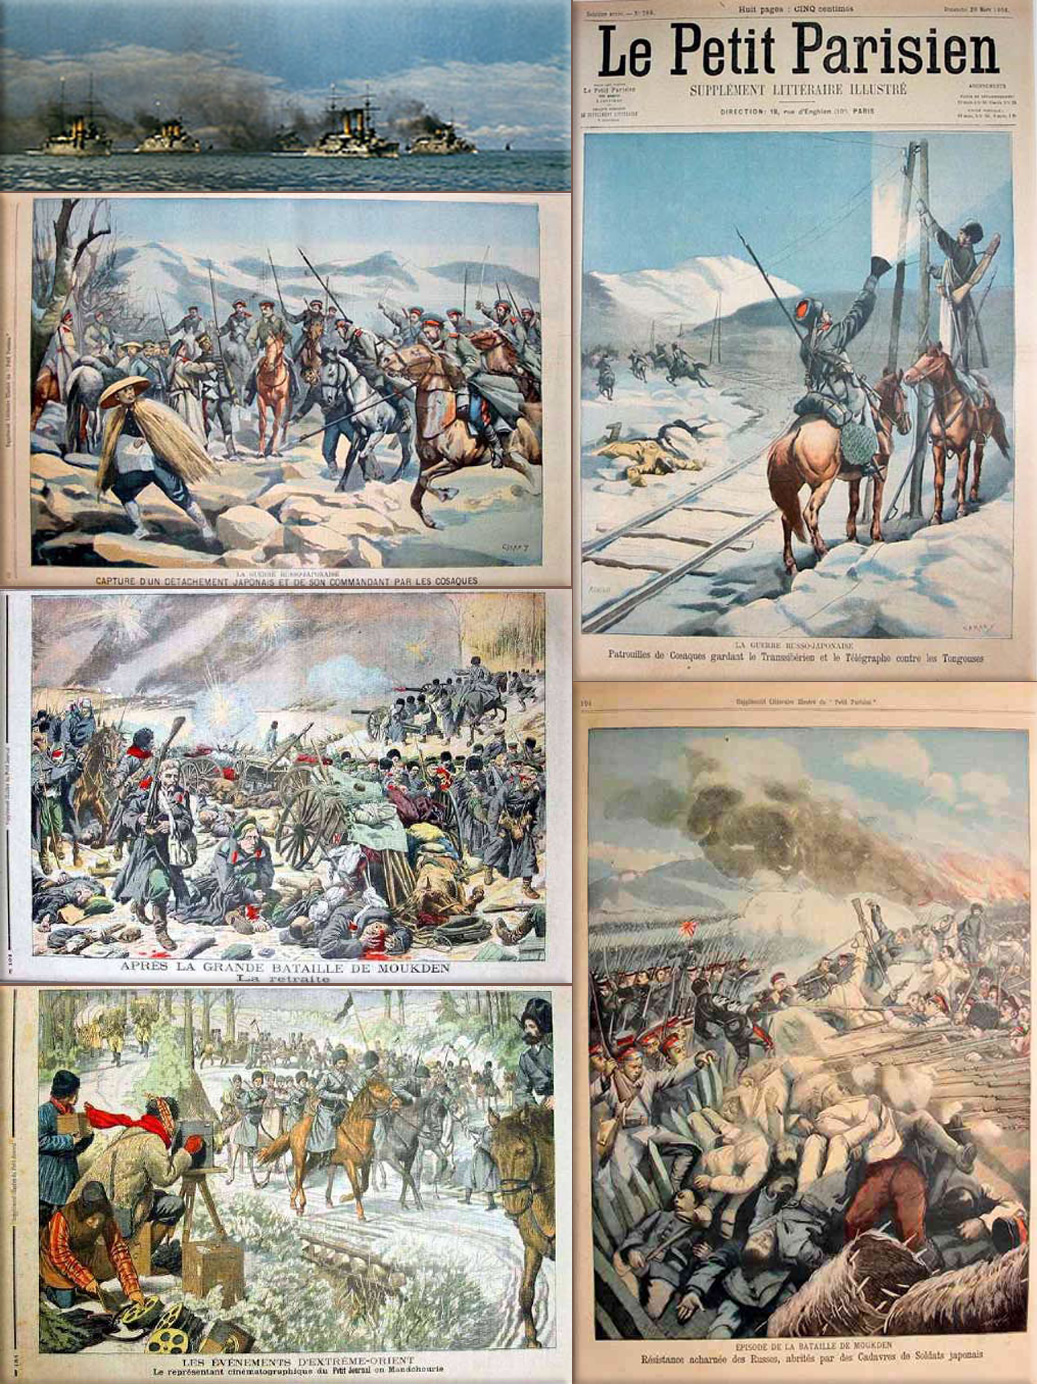 Russo-Japanese War: The Battle of Tsushima ends with the destruction of the Russian Baltic Fleet; Cossacks capture Japanese detachment and their commander; Aftermath of Mukden: the Russians defeated; Photographing Russians on the move in Manchuria; Cossacks protect the Telegraph lines; Battle of Mukden with piles of Japanese dead at the Ramparts, credit Andrewn.tripod